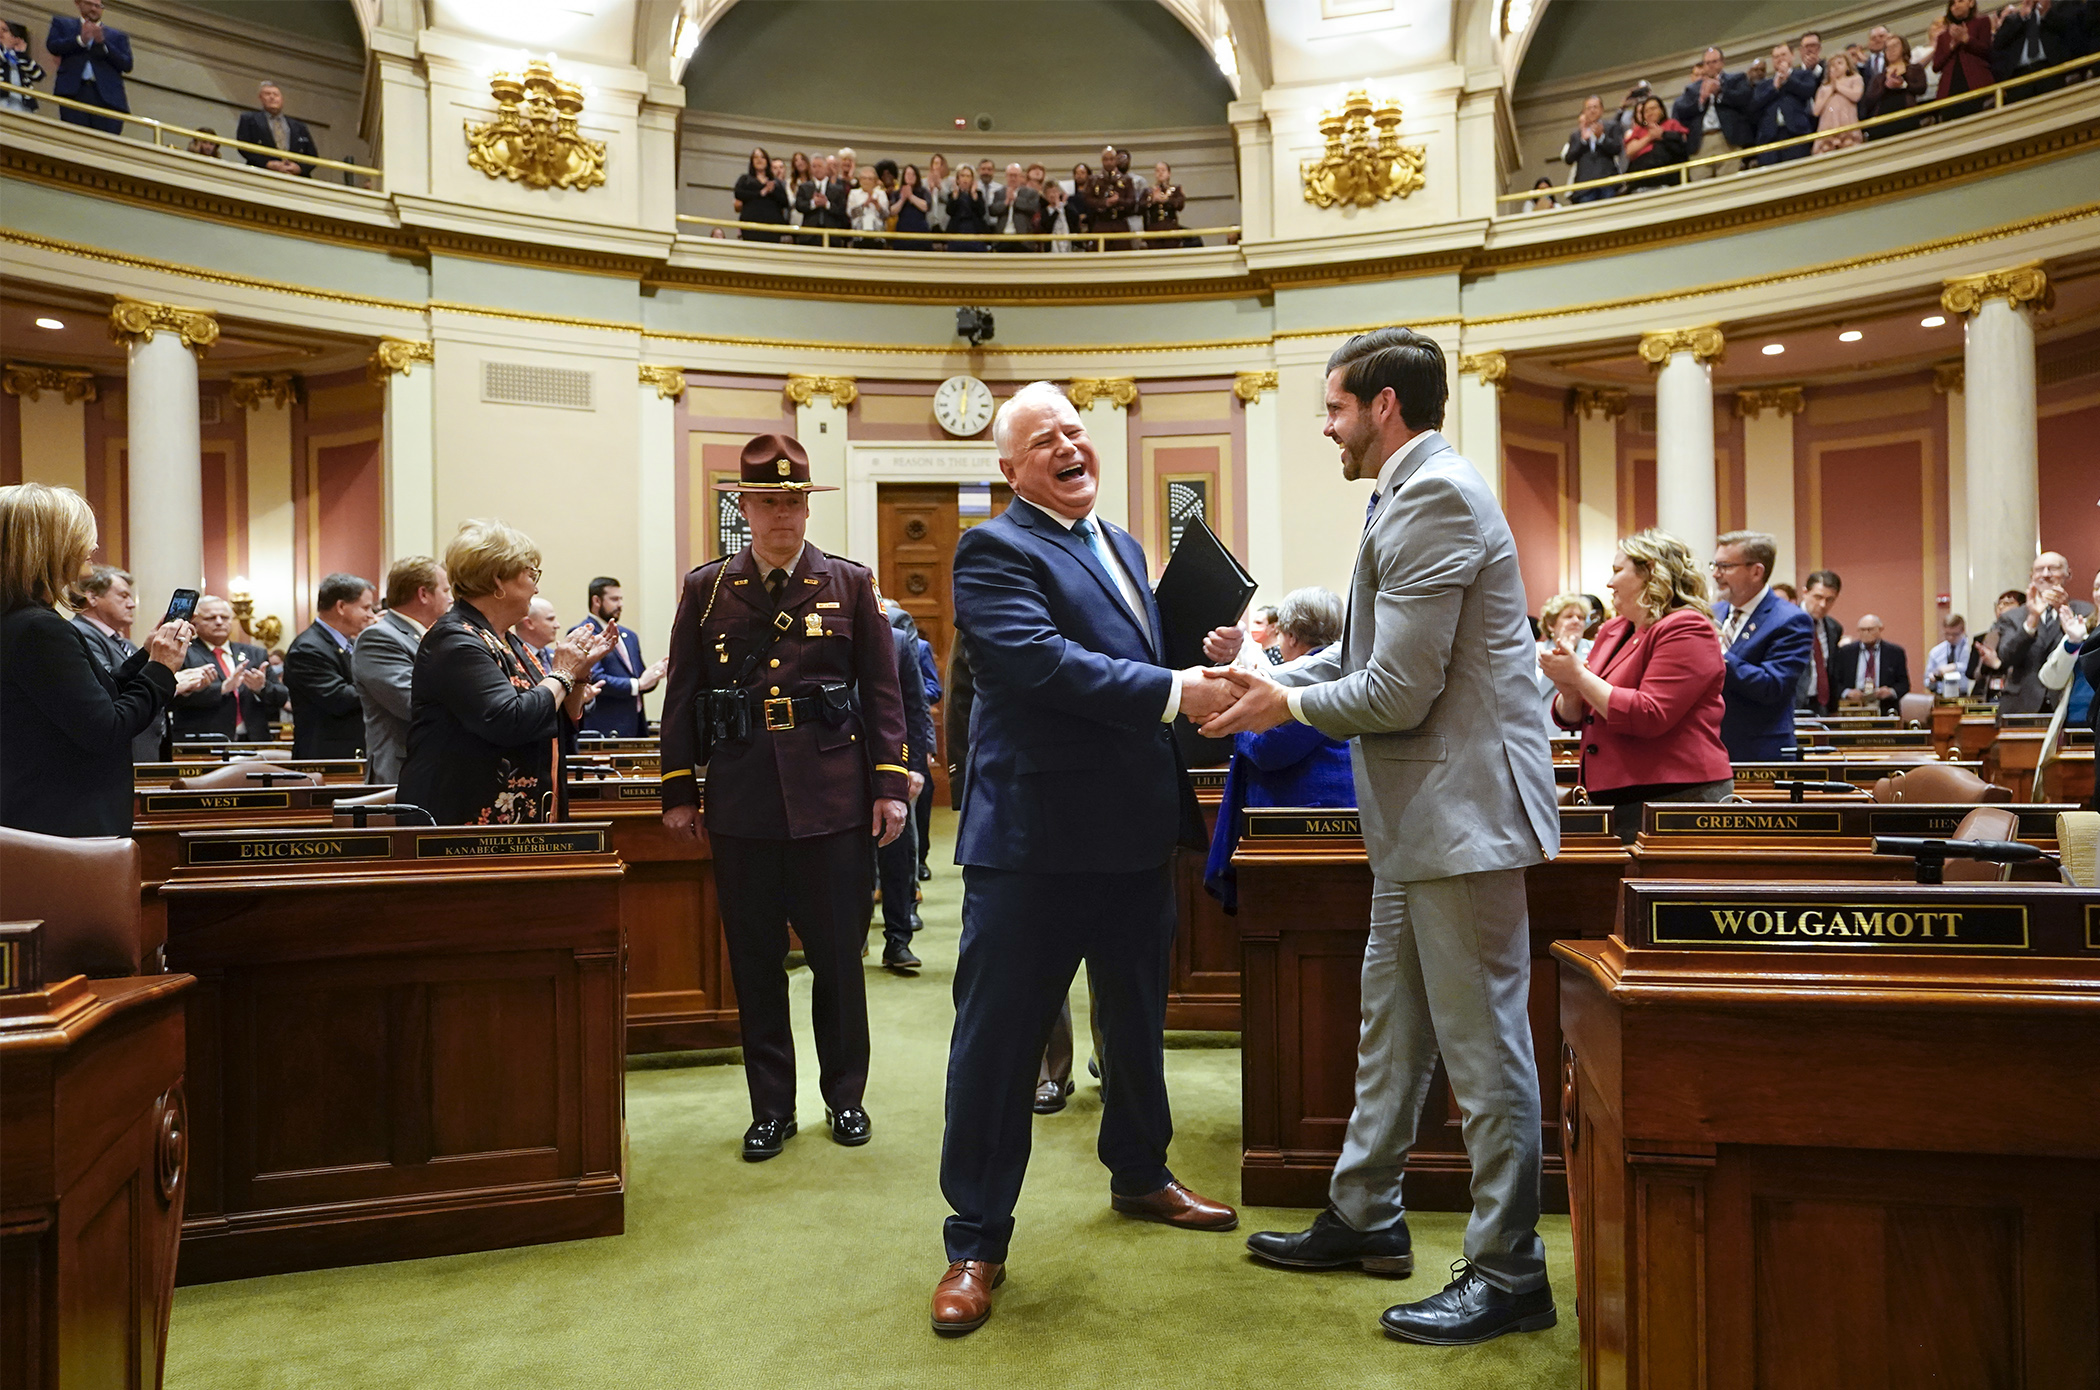 Rep. Dan Wolgamott, right, greets Gov. Tim Walz as he enters the House Chamber to give his State of the State address April 24. Photo by Paul Battaglia